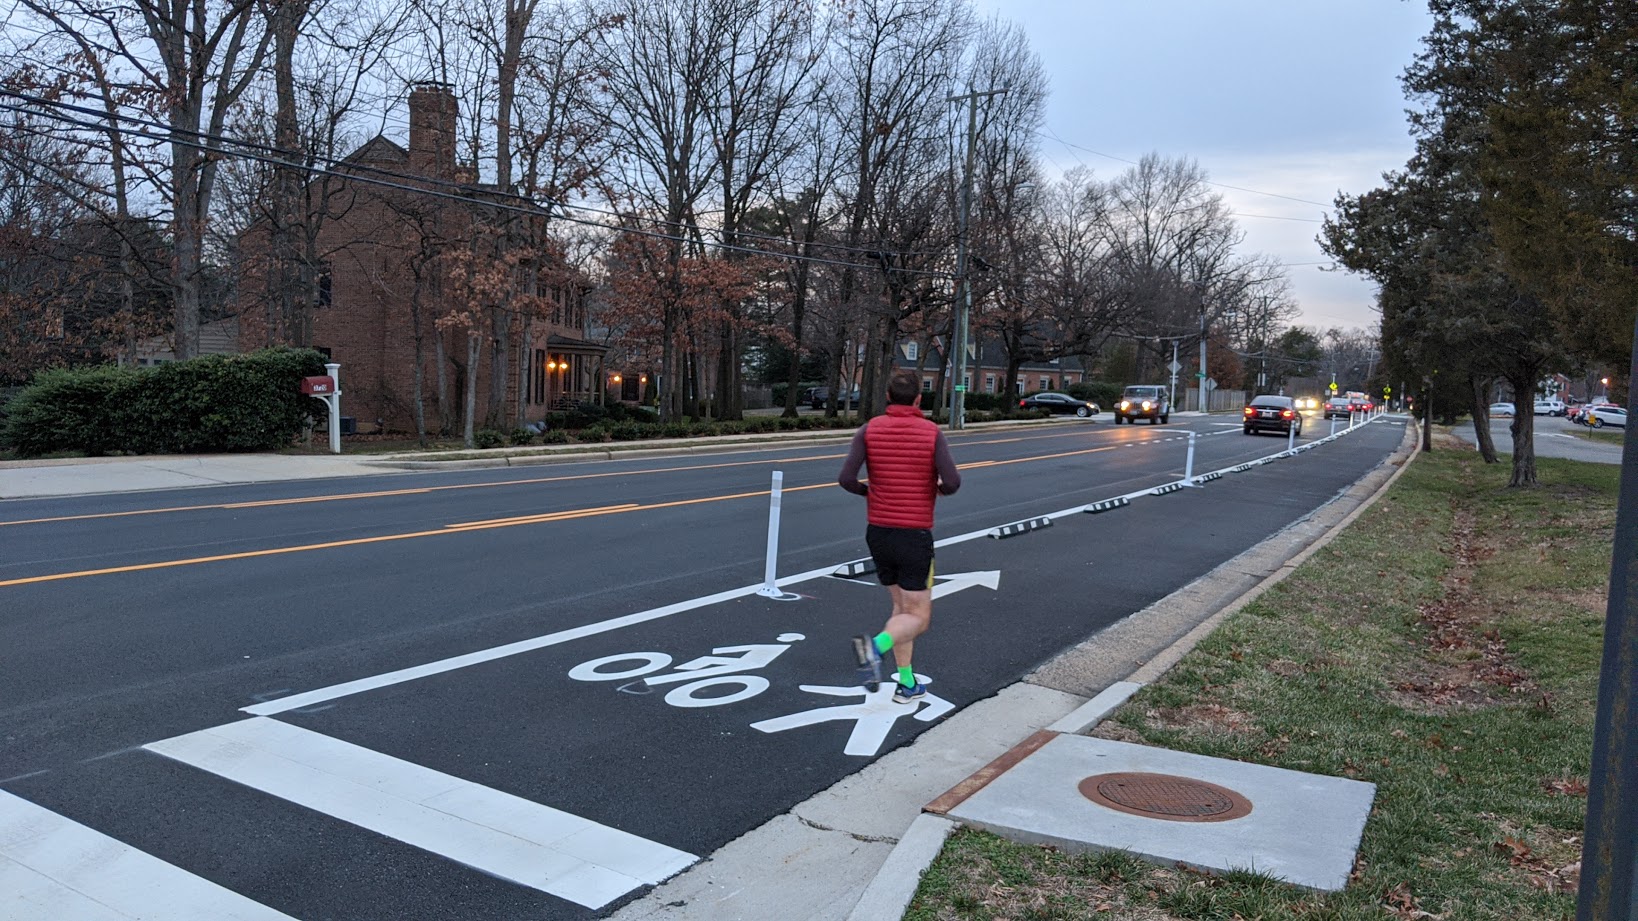 Image of a person jogging in the shared bicycle and pedestrian lane on Seminary Road.